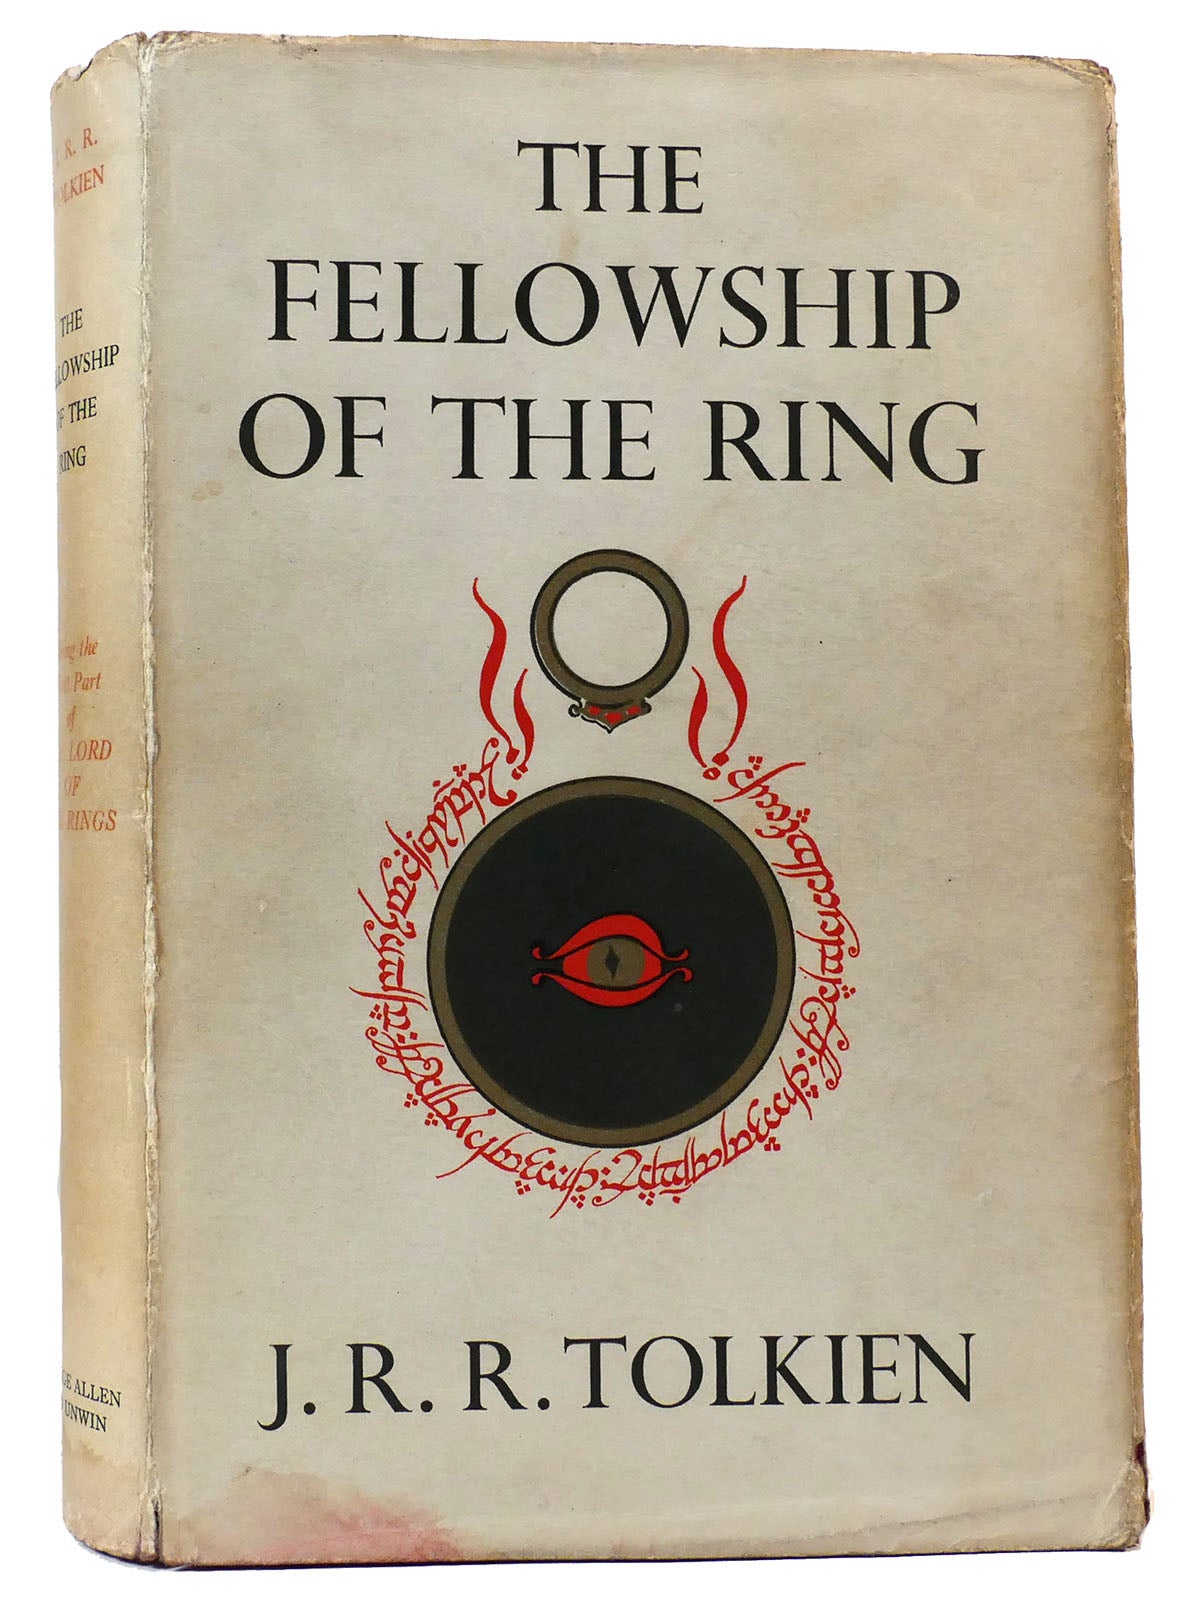 LORD OF THE RINGS FELLOWSHIP OF THE RING, THE TWO TOWERS, RETURN OF THE KING | J. R. R. Tolkien | First 5th Impression